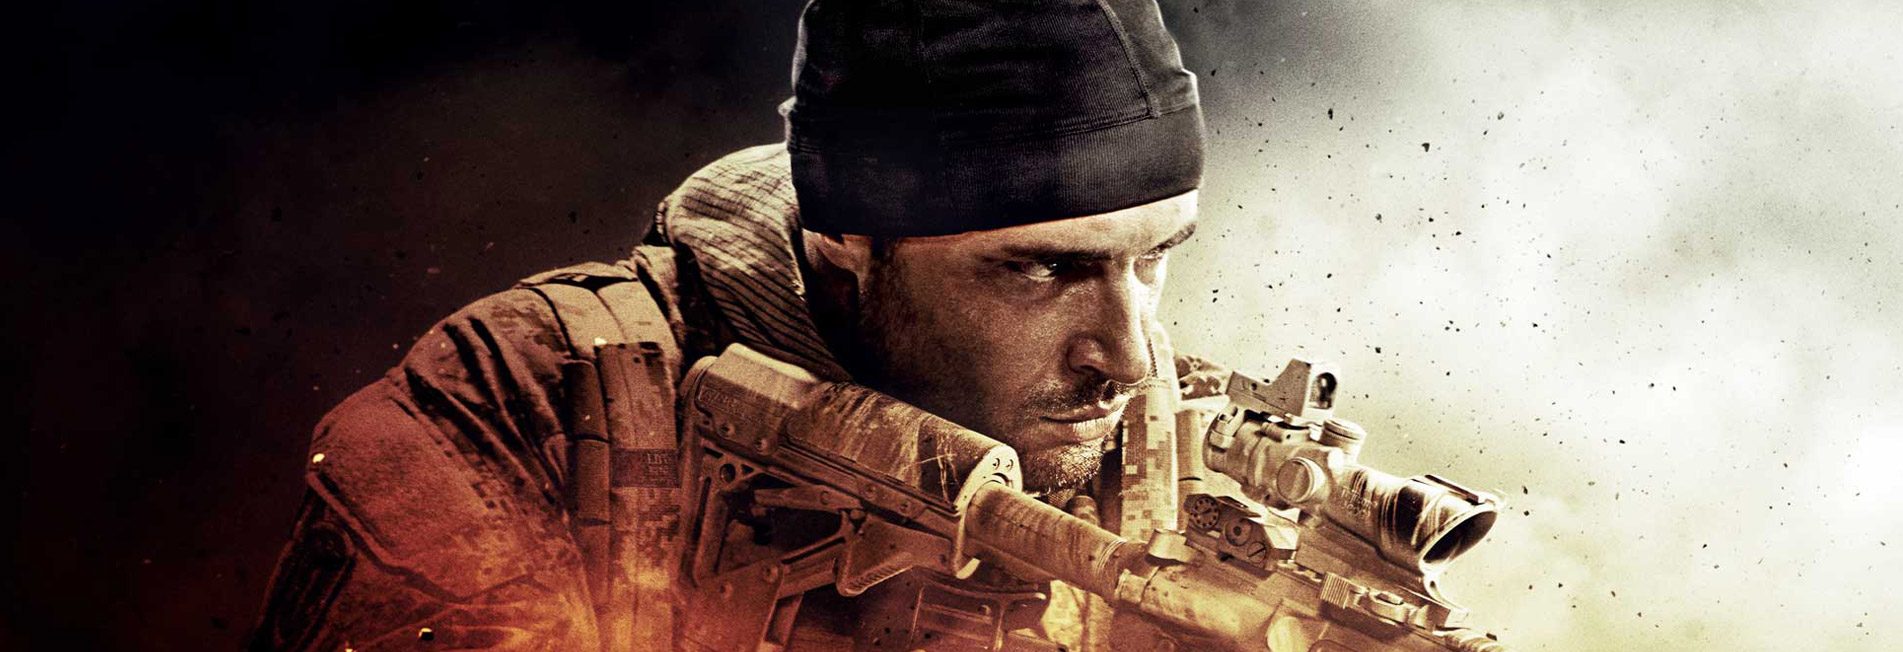 medal of honor warfighter gameplay